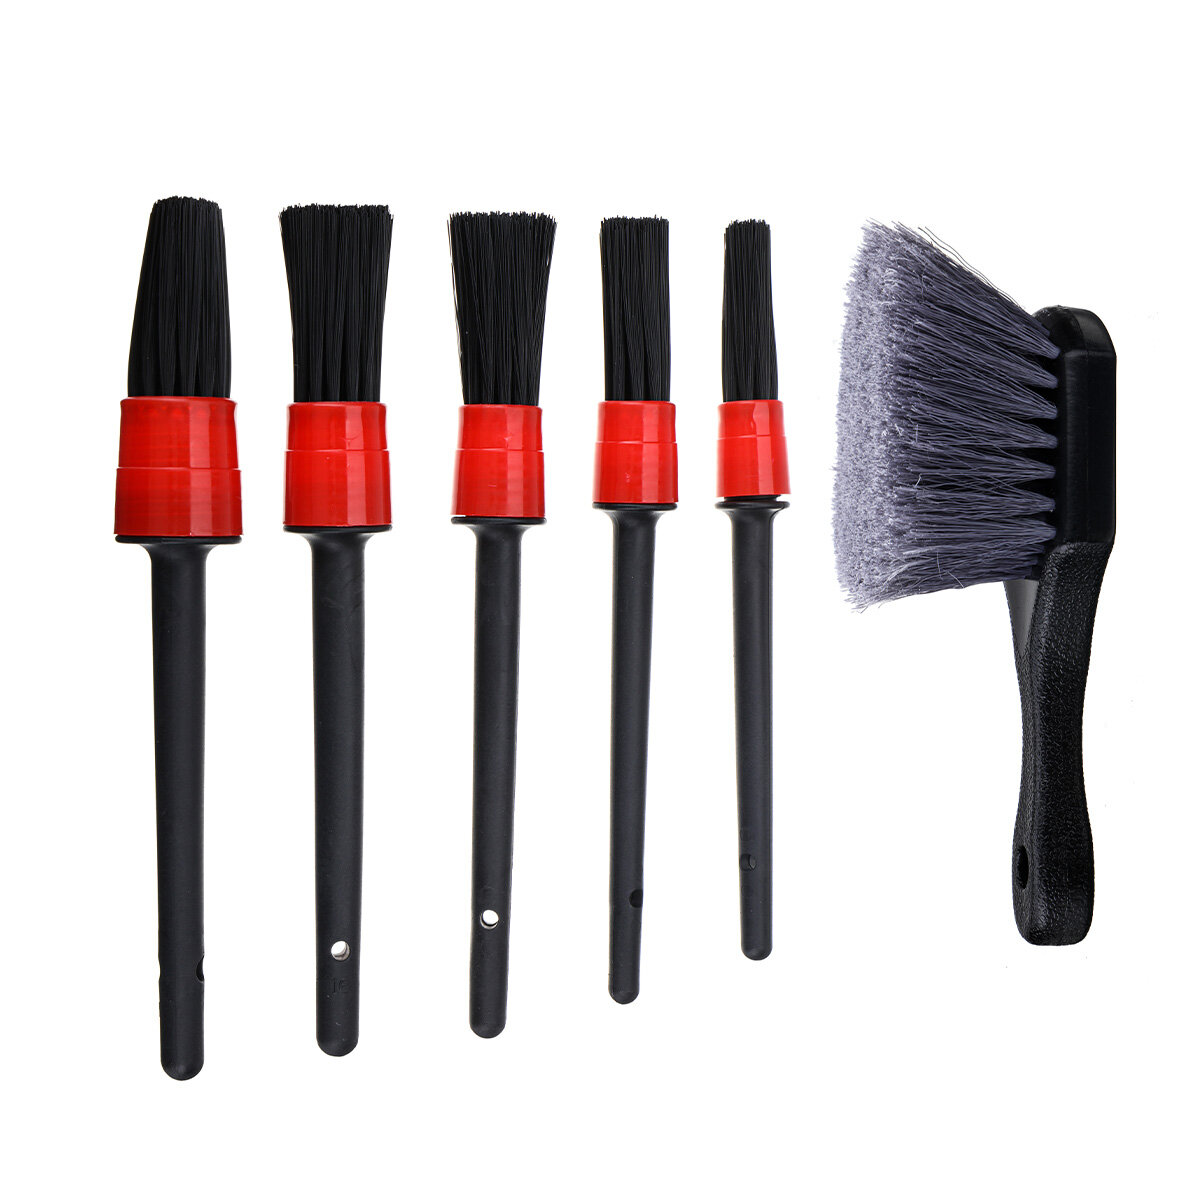 

6PCS Tire Detail Brush Crevice Cleaning Wash Tool Short Handle Brush SetInterior Exterior Leather Air Vents Care Clean